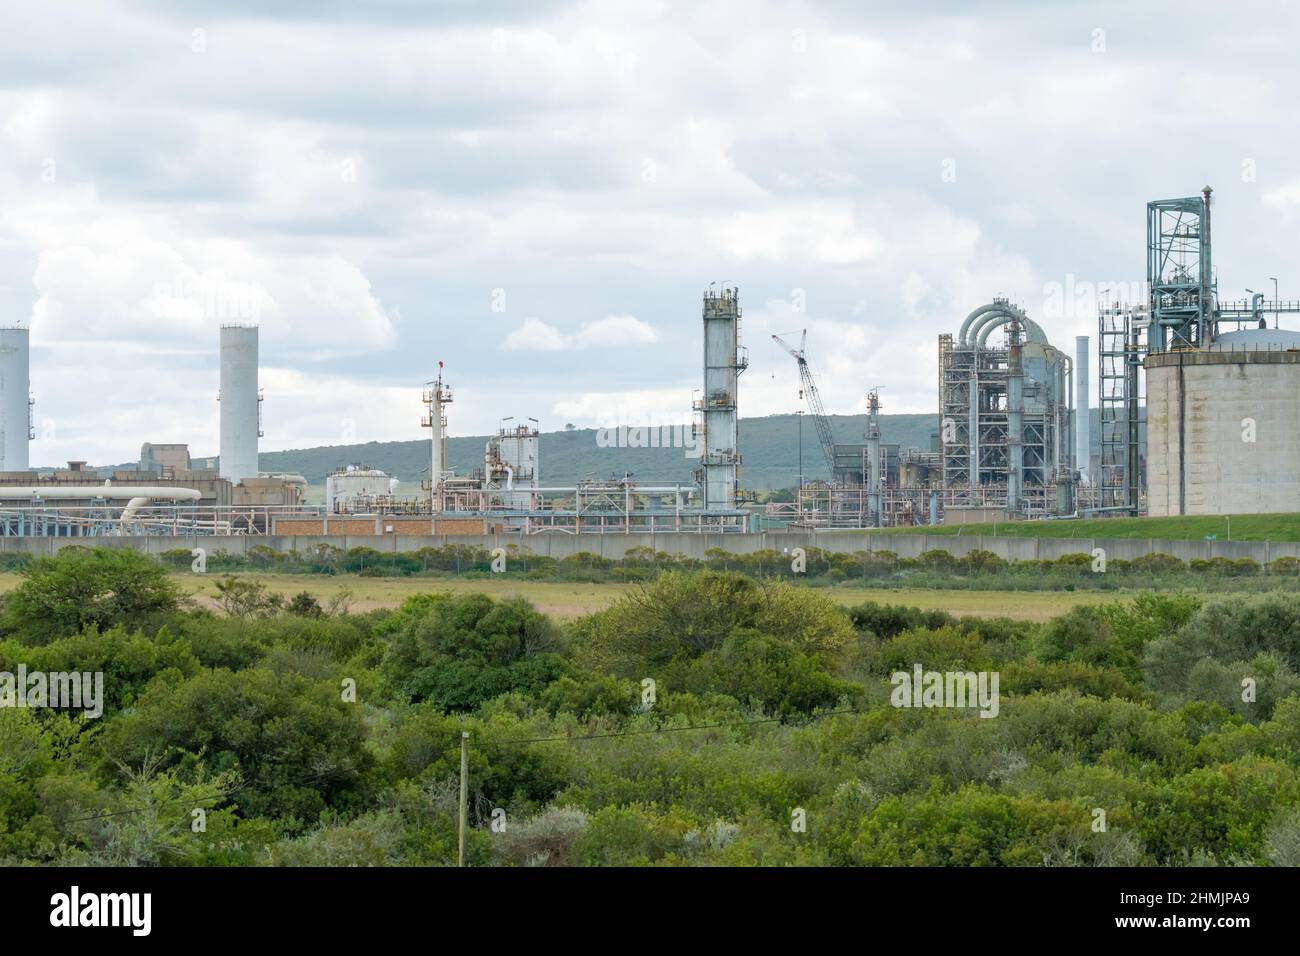 gas and fuel refinery in Mossel Bay, Western Cape, South Africa concept infrastructure and industry Stock Photo